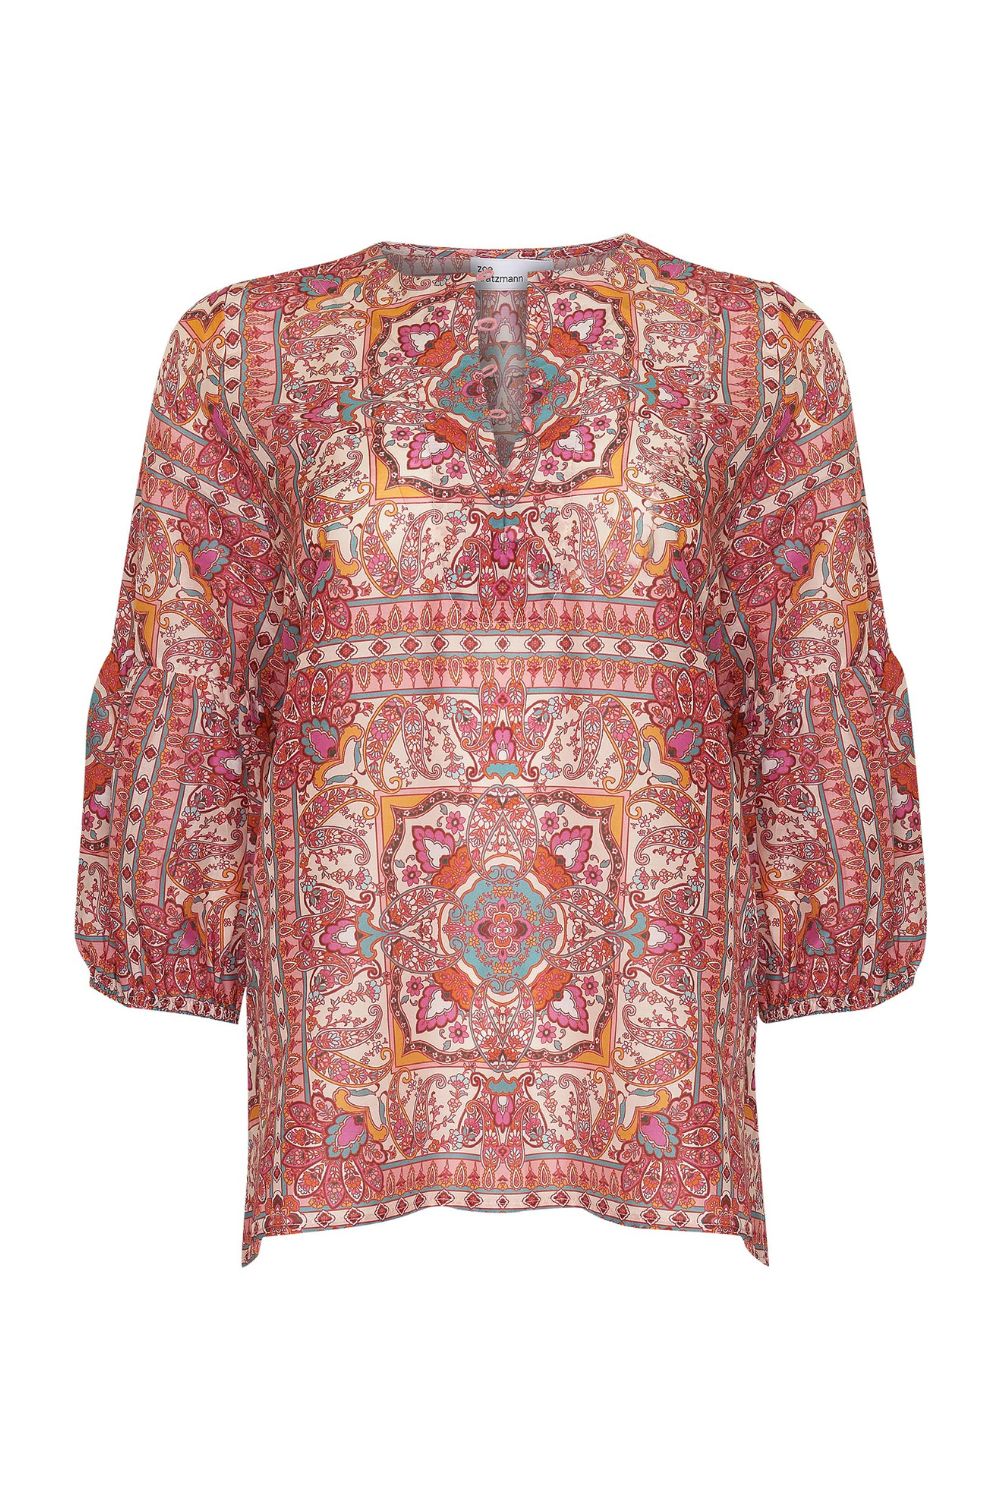 pink print, mid length sleeve, round neckline, covered buttons, small side splits, top, product image